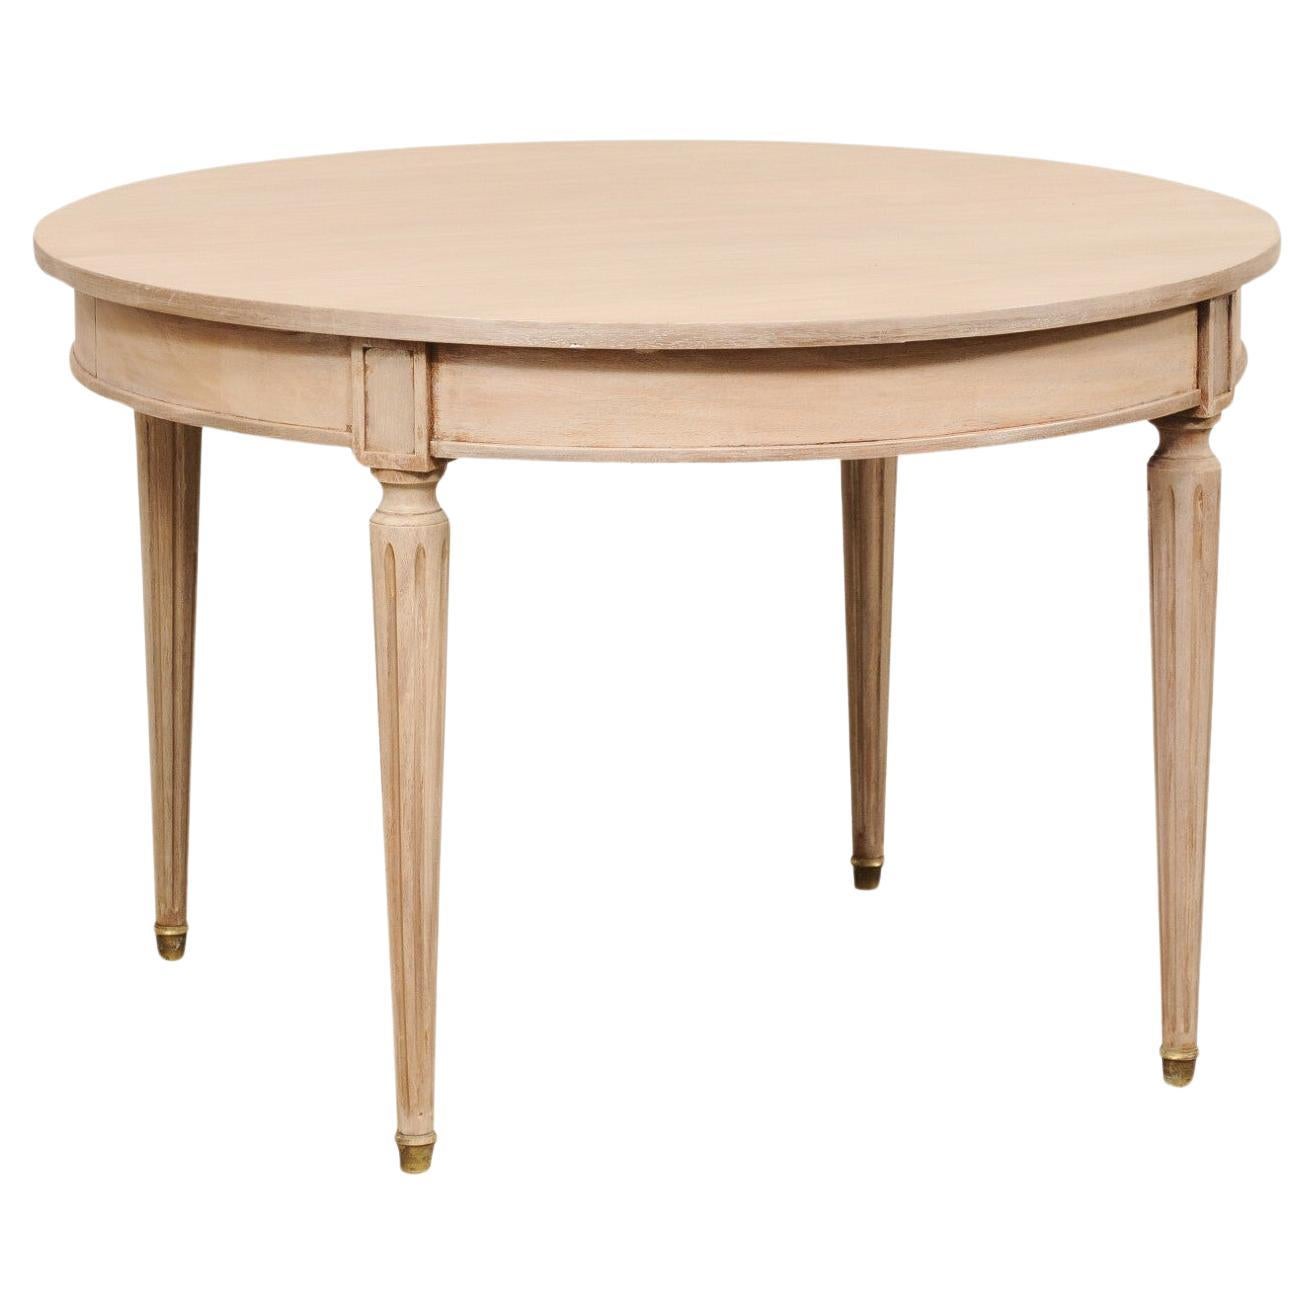 French Round Painted Wood Table w/Fluted Legs & Brass Feet, 3.5 Ft Diameter